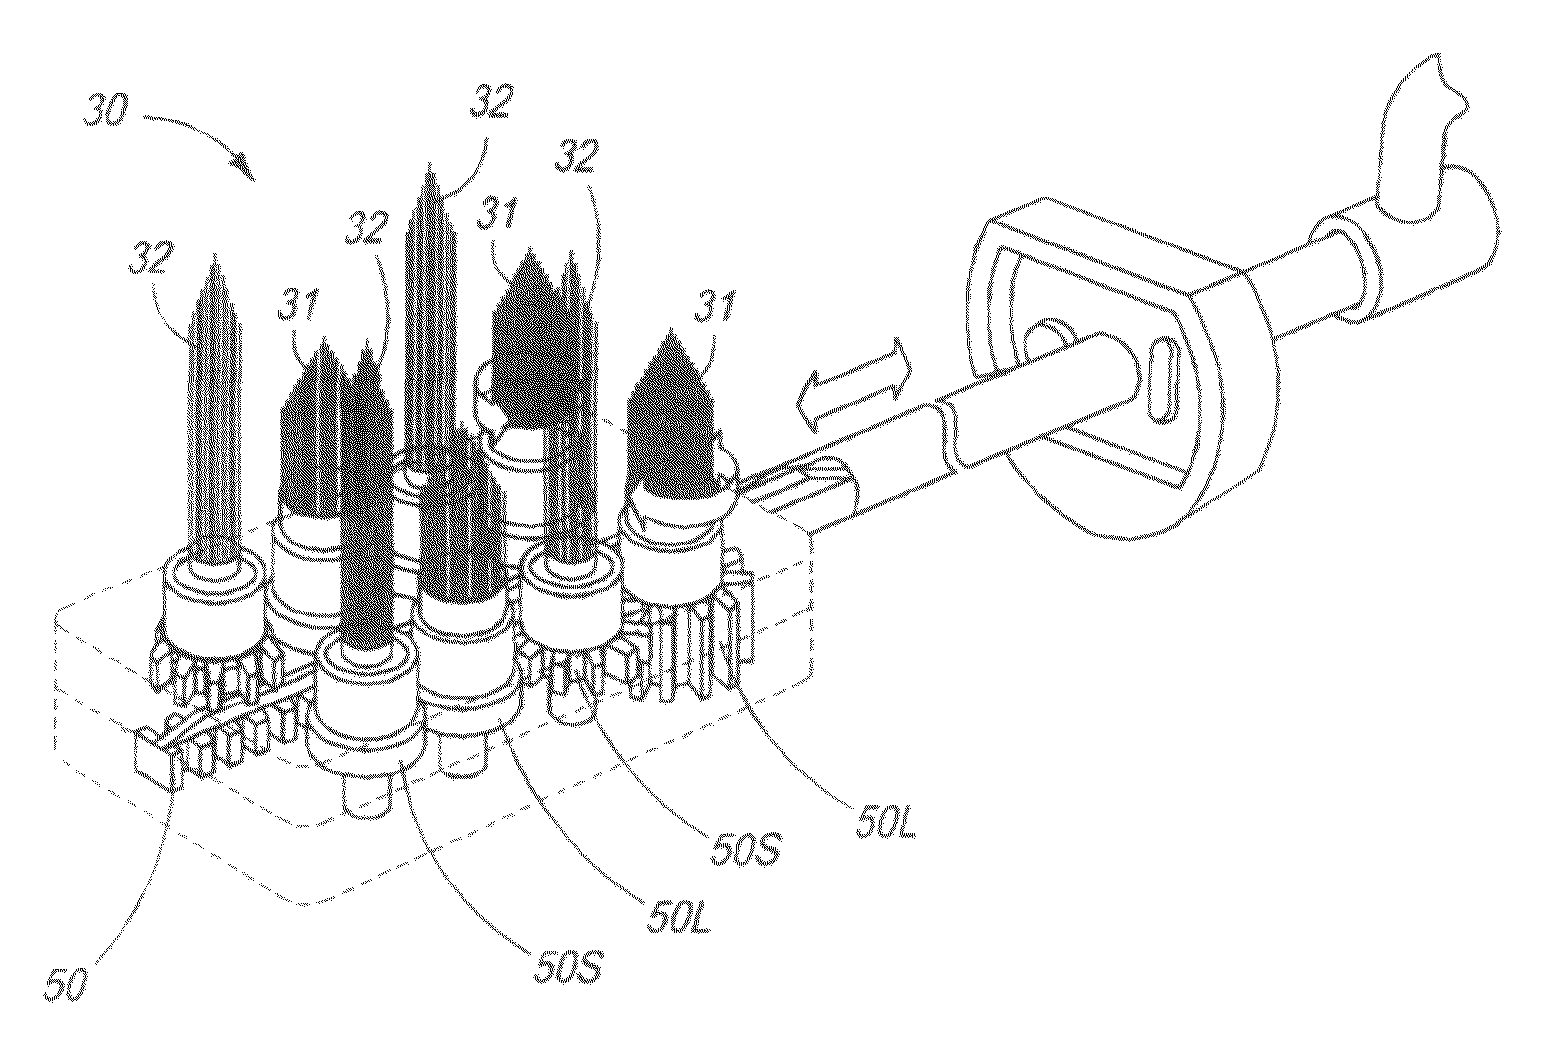 Interchangeable tooth brush system and associated method for promoting oral health